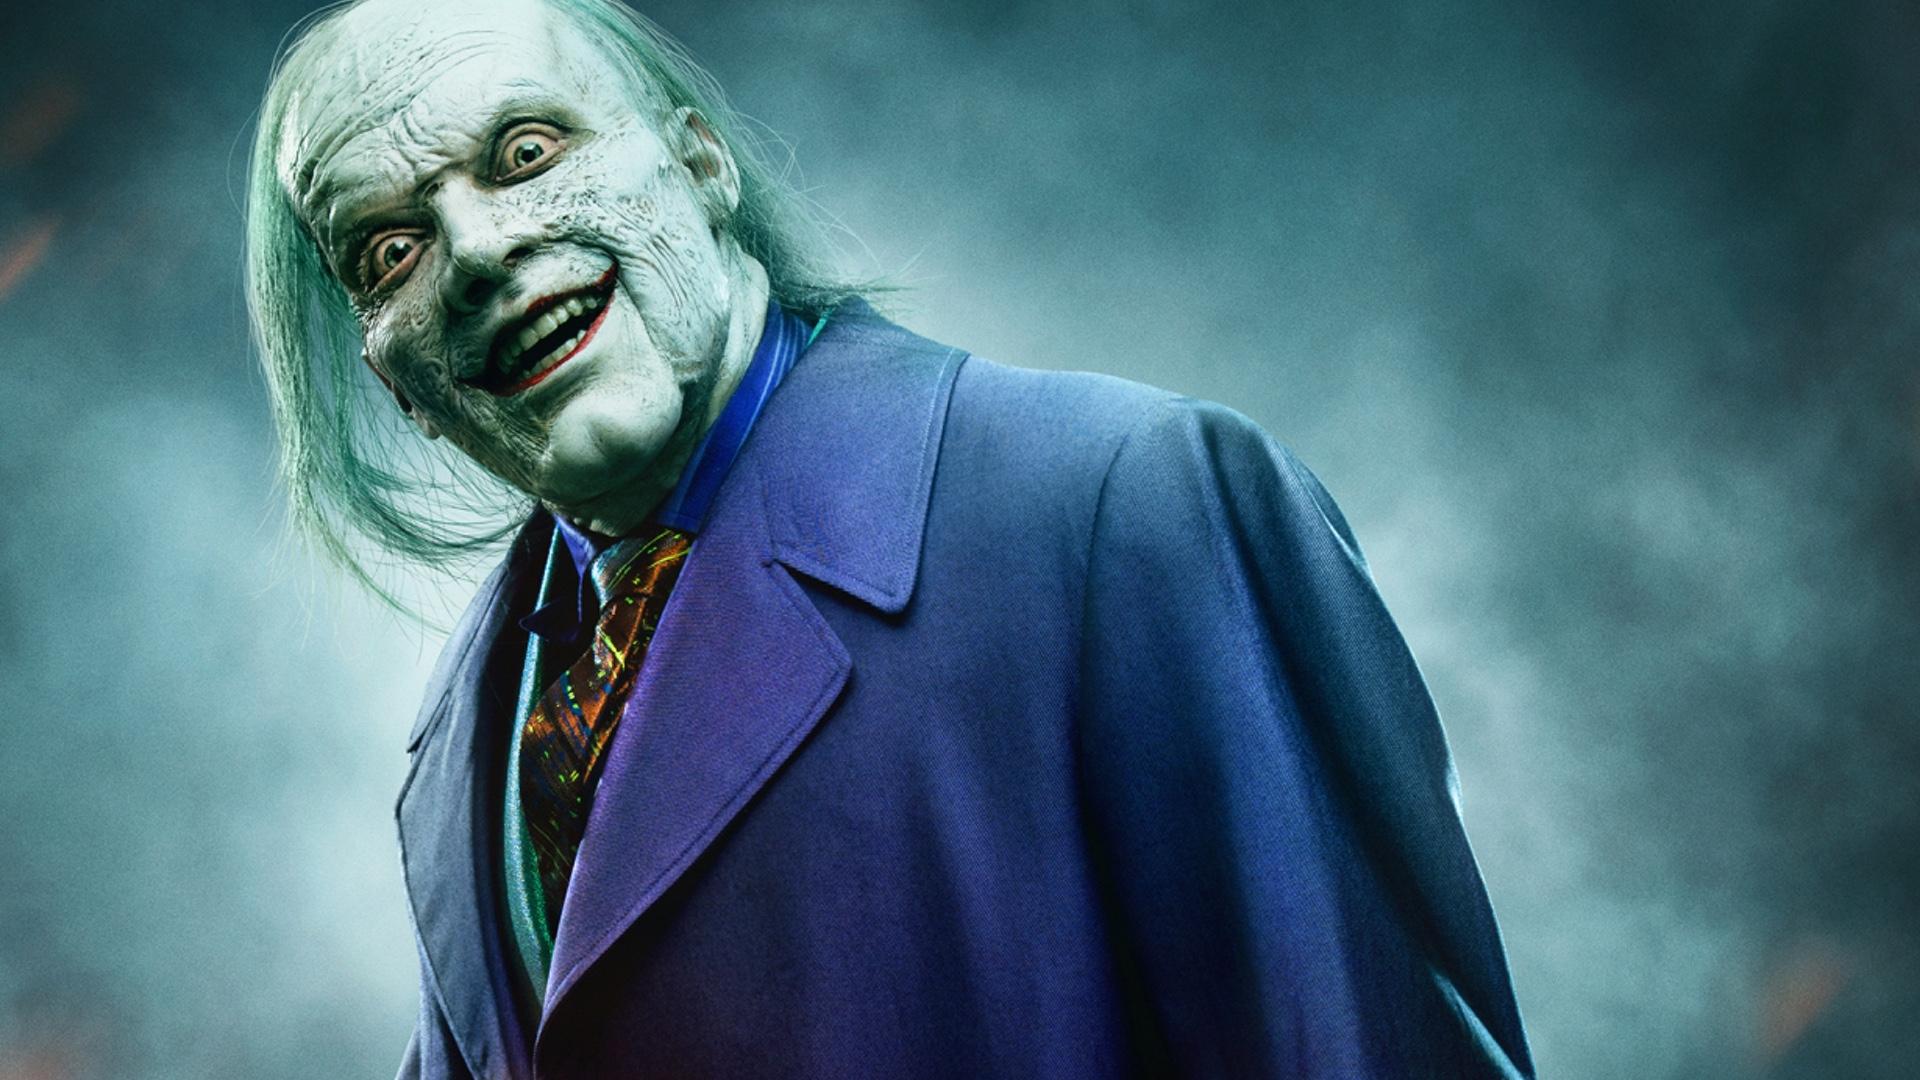 The Final Look of The Joker in GOTHAM Has Been Revealed; Watch a New